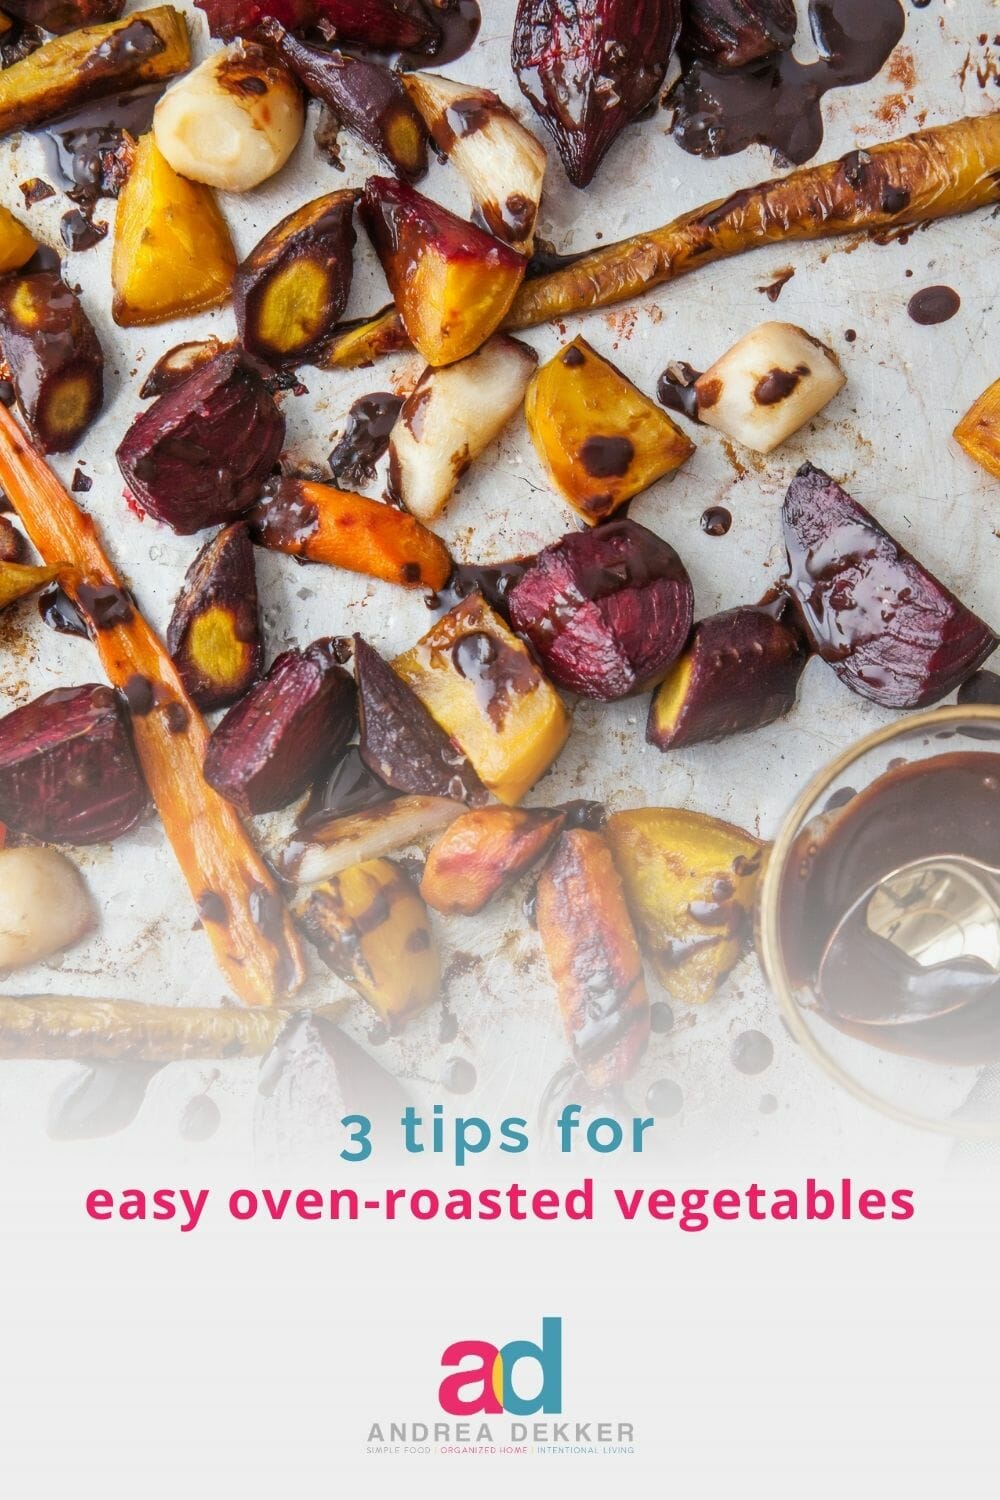 Impress your family and guests with my ridiculously simple recipe for oven-roasted vegetables. My 3 bonus tips make the process practically fool-proof! via @andreadekker